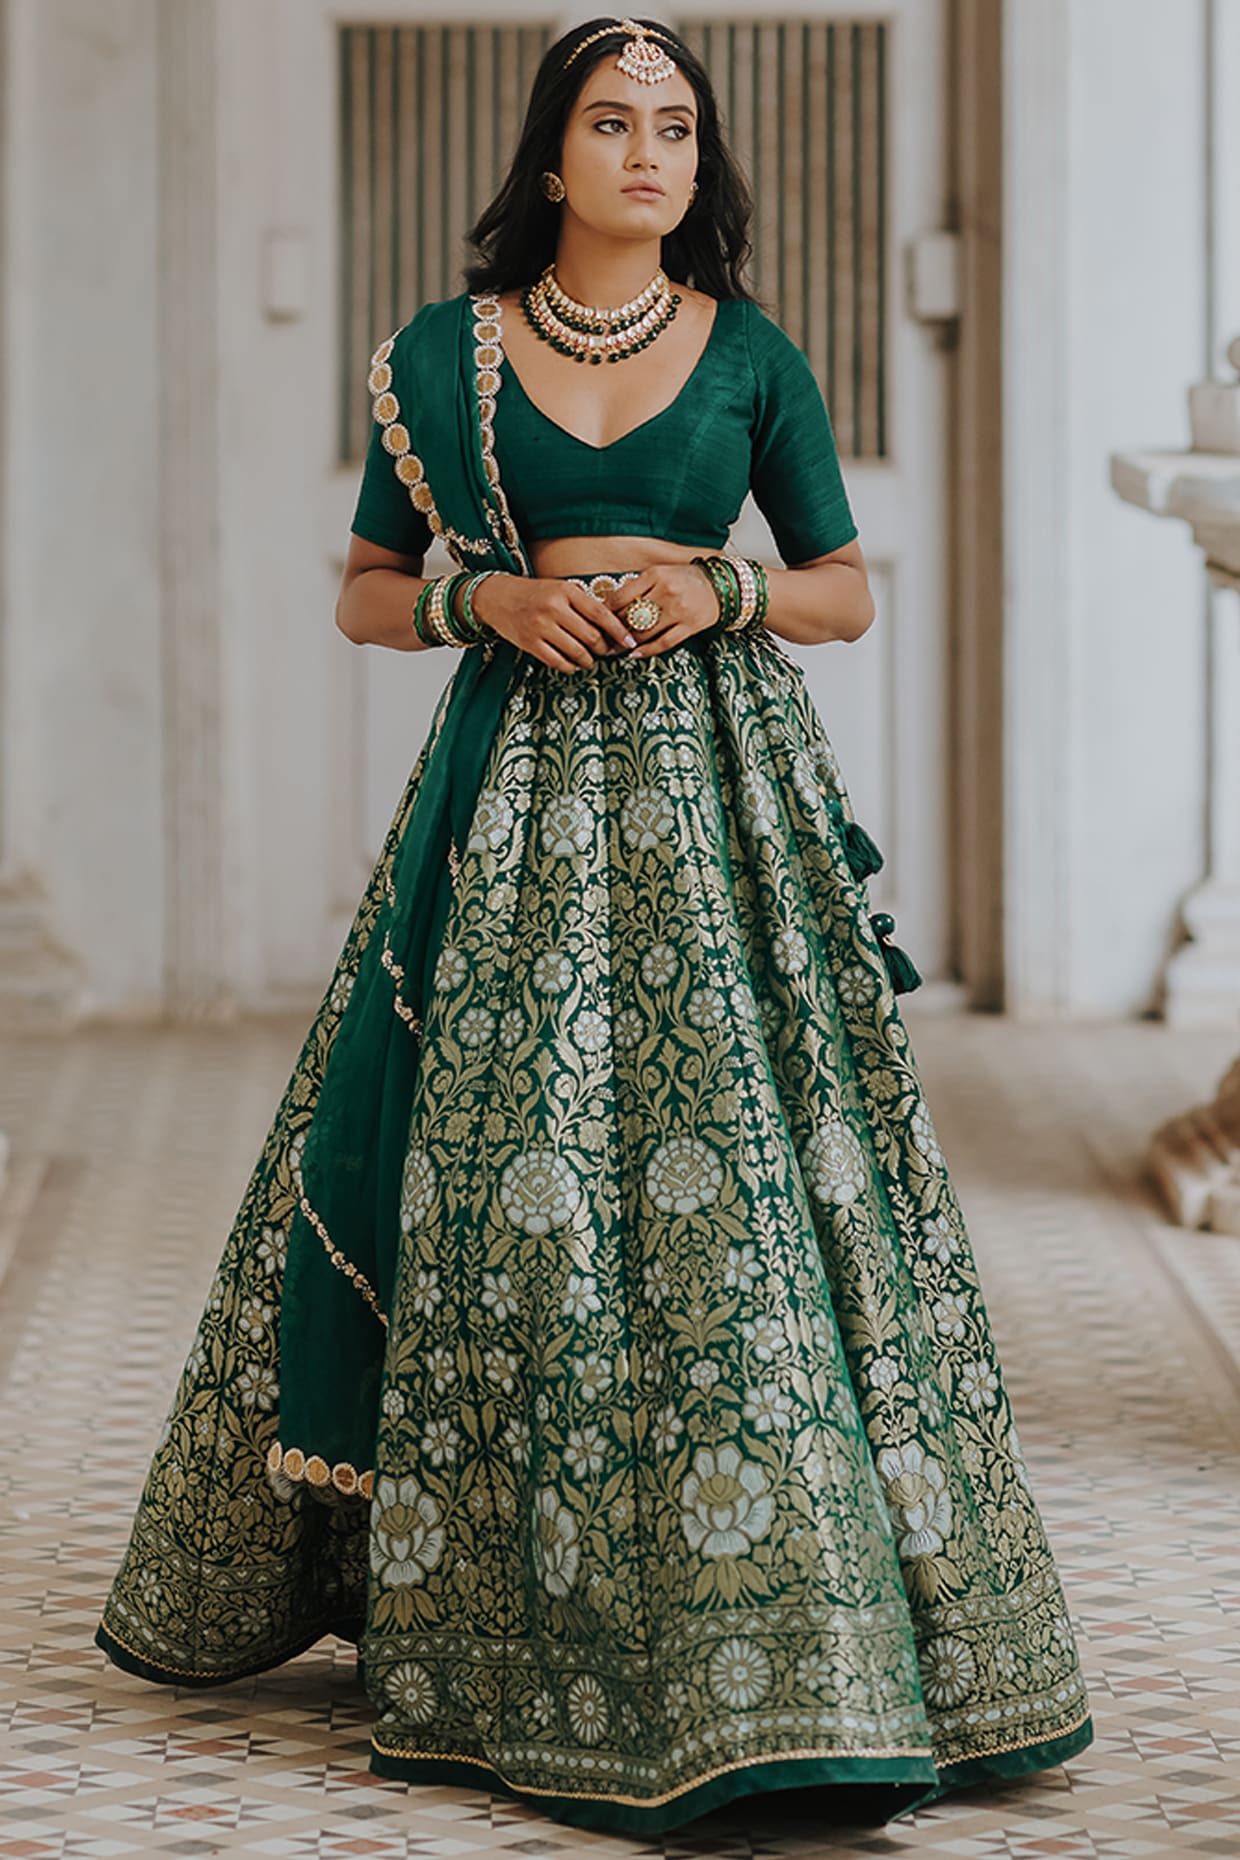 Banarsi Lehnga HOUSE Jalandhar - BLH World We Deals in All kind of  expensive Jewellery, Heavy and Designers Bridal Lehenga,Boutique styled  Lehengas (Both party wear and Bridal) , Enormous Variety of Designer